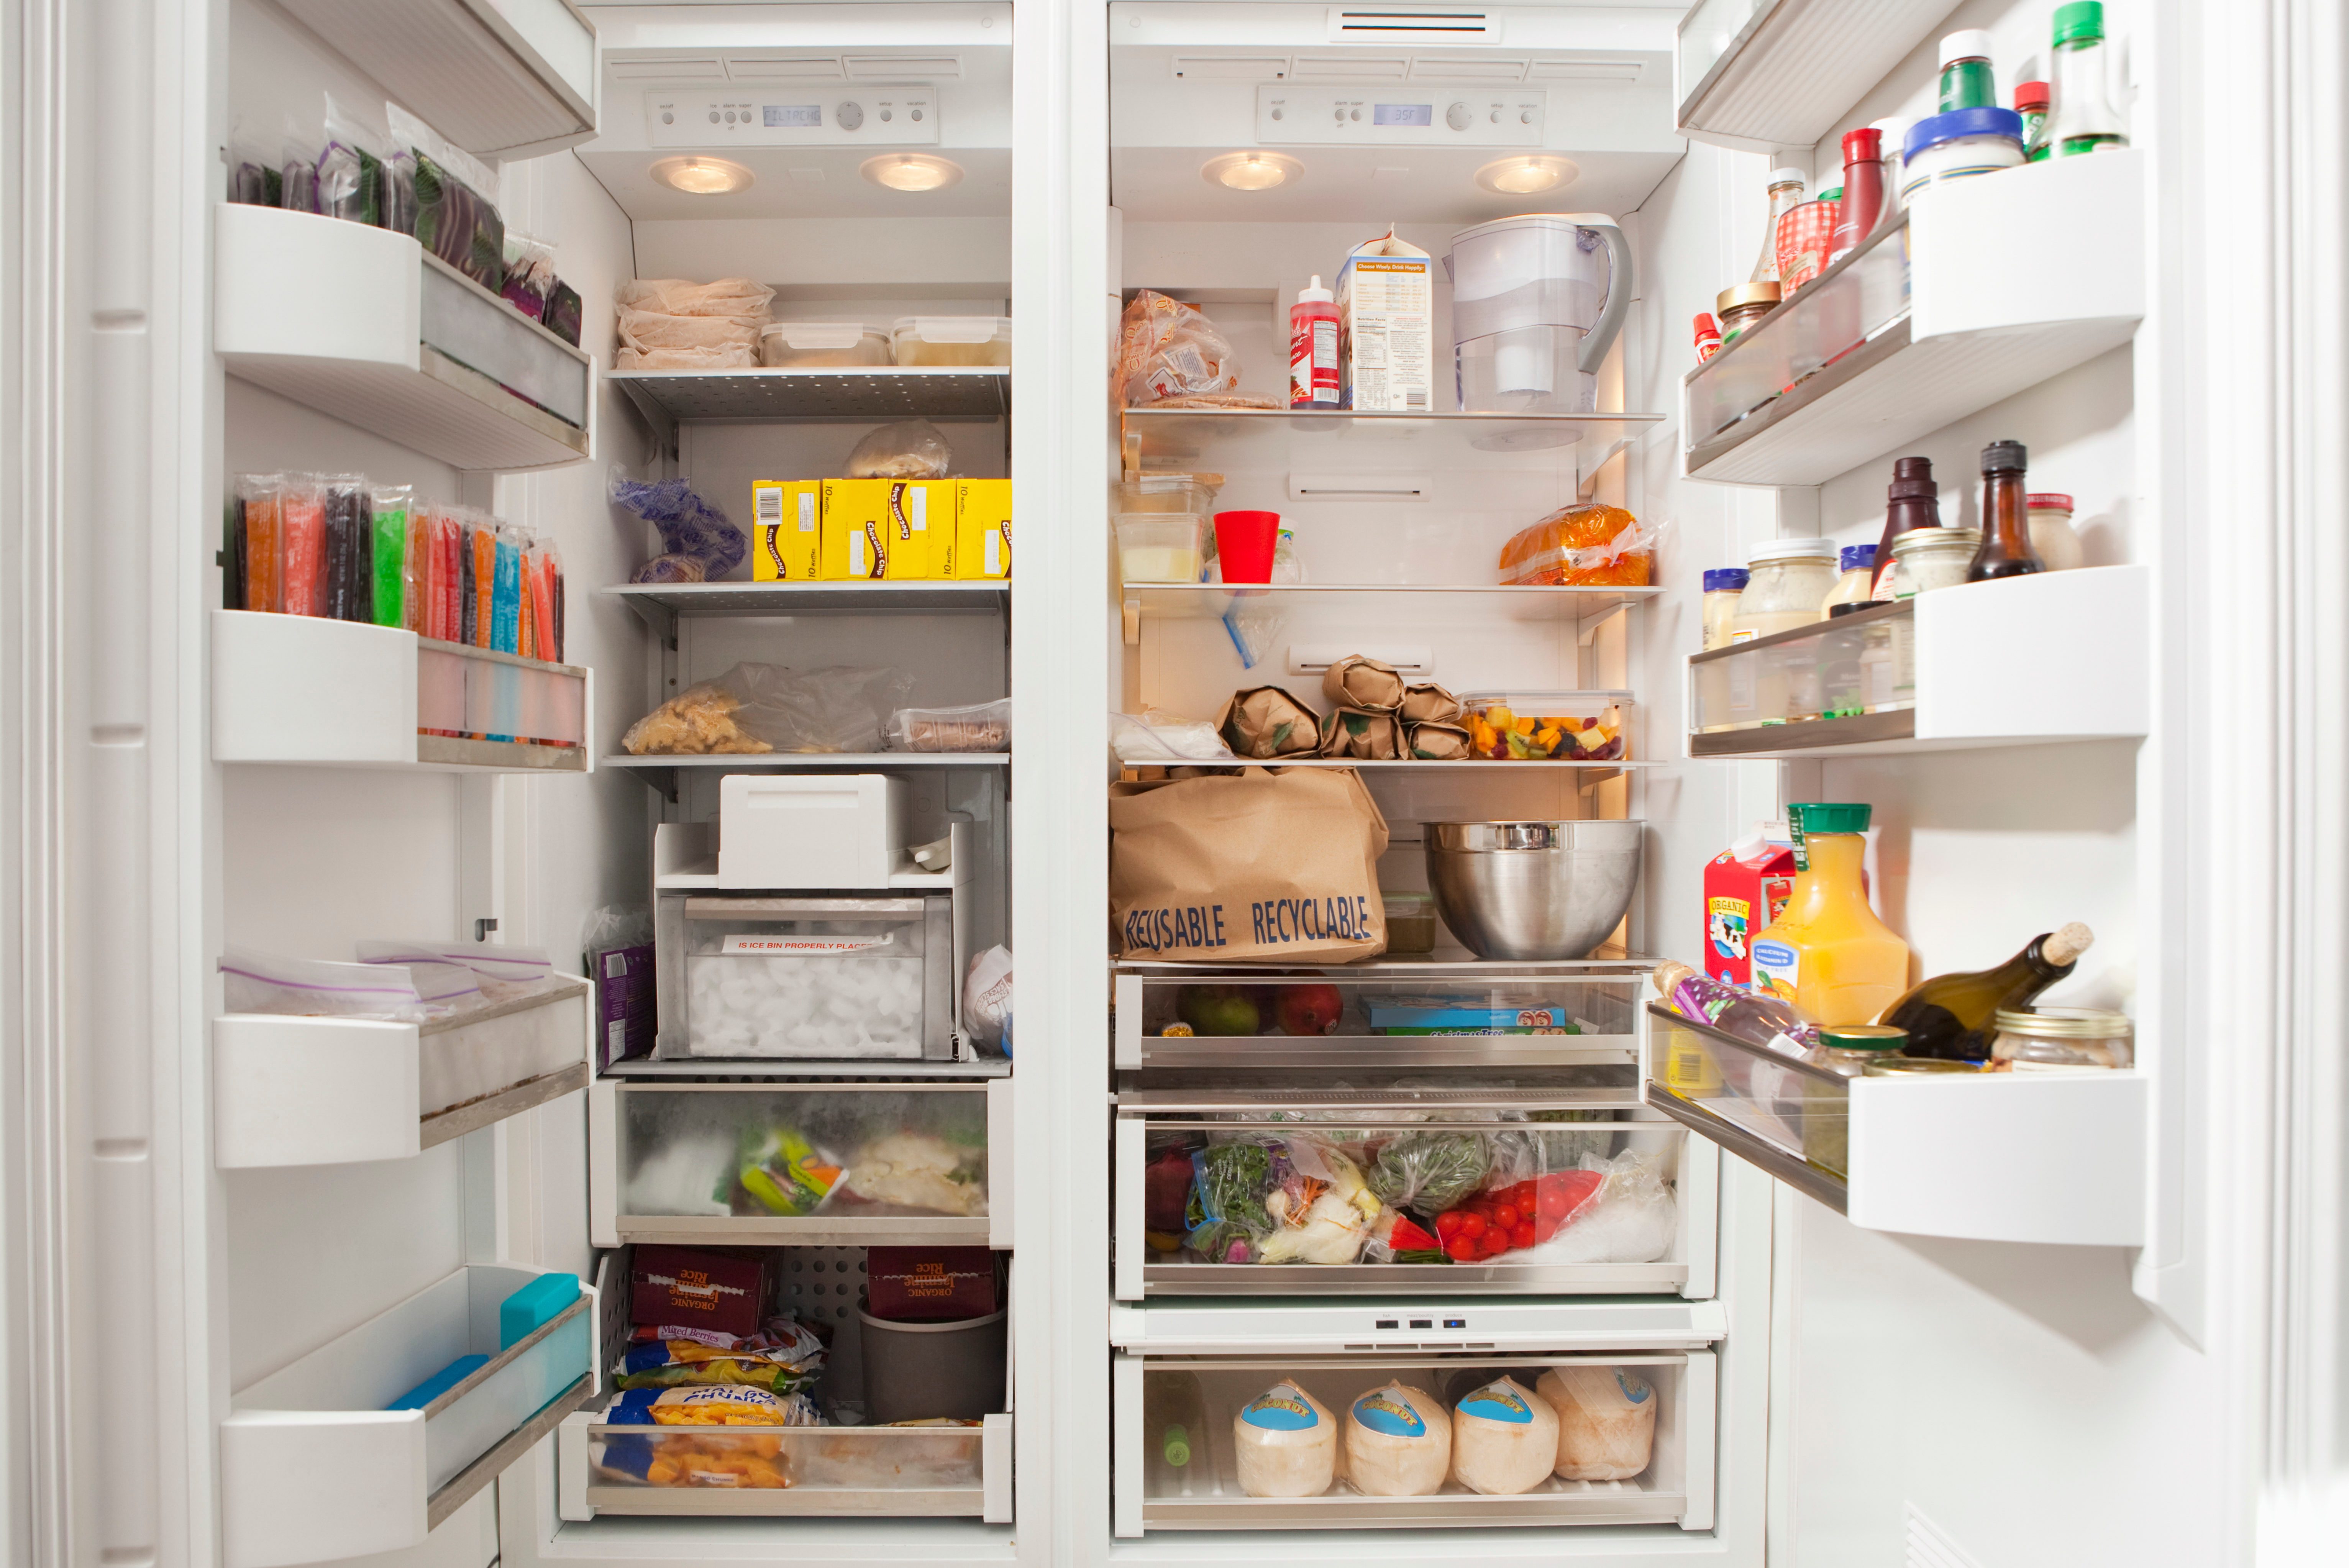 Open Refrigerator With Stocked Food Products